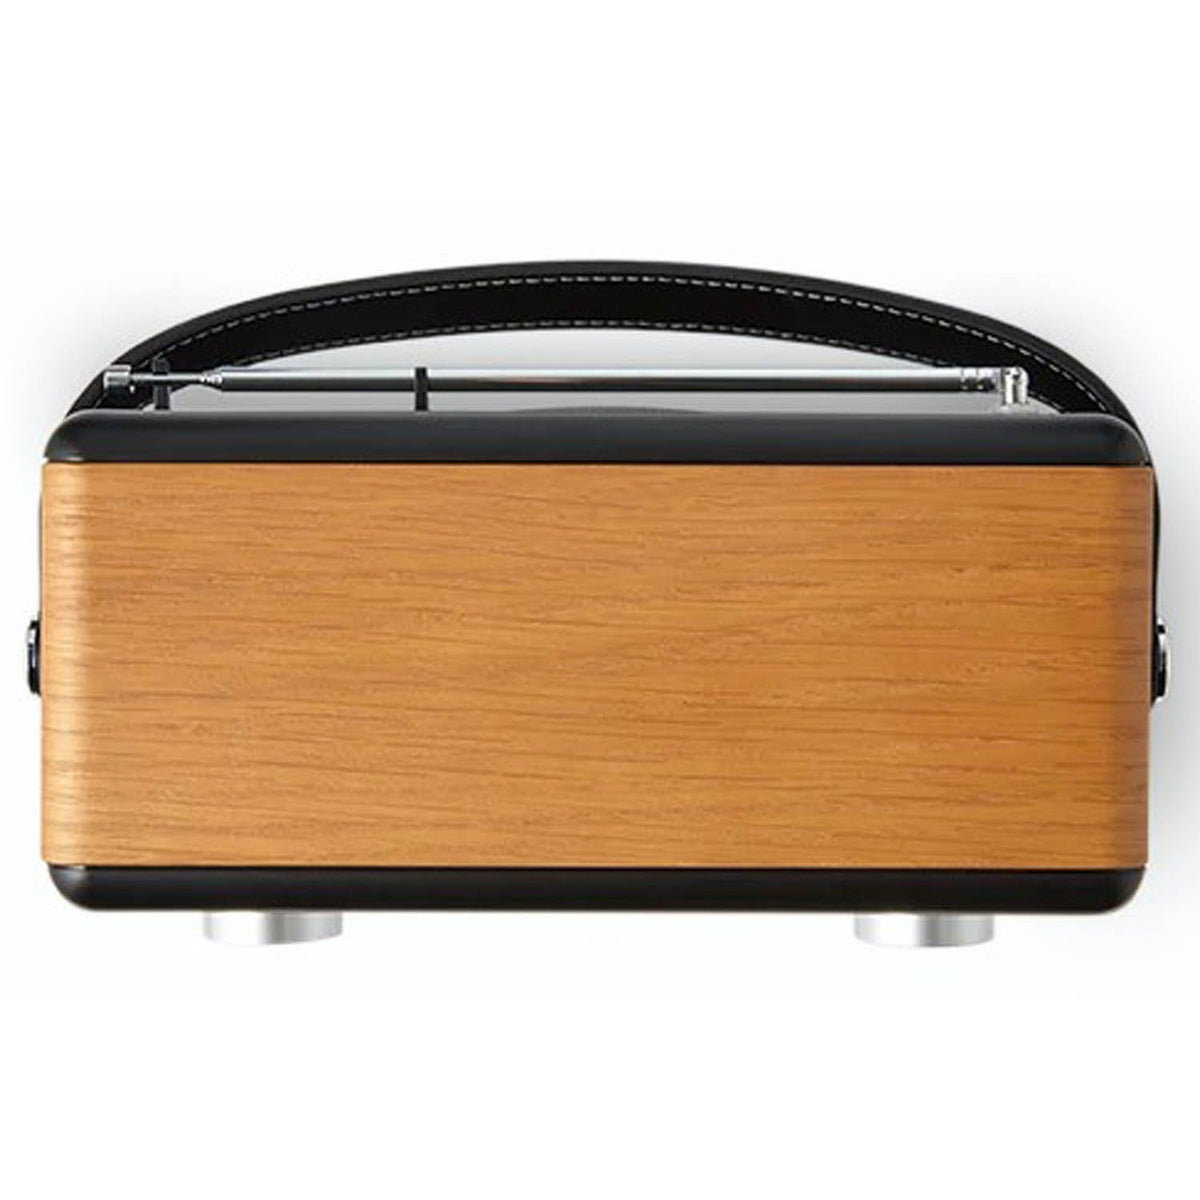 Roberts Stream 94L DAB+/DAB/FM/Internet Radio with Bluetooth - Black &amp; Natural Wood | STREAM94LNW from Roberts - DID Electrical